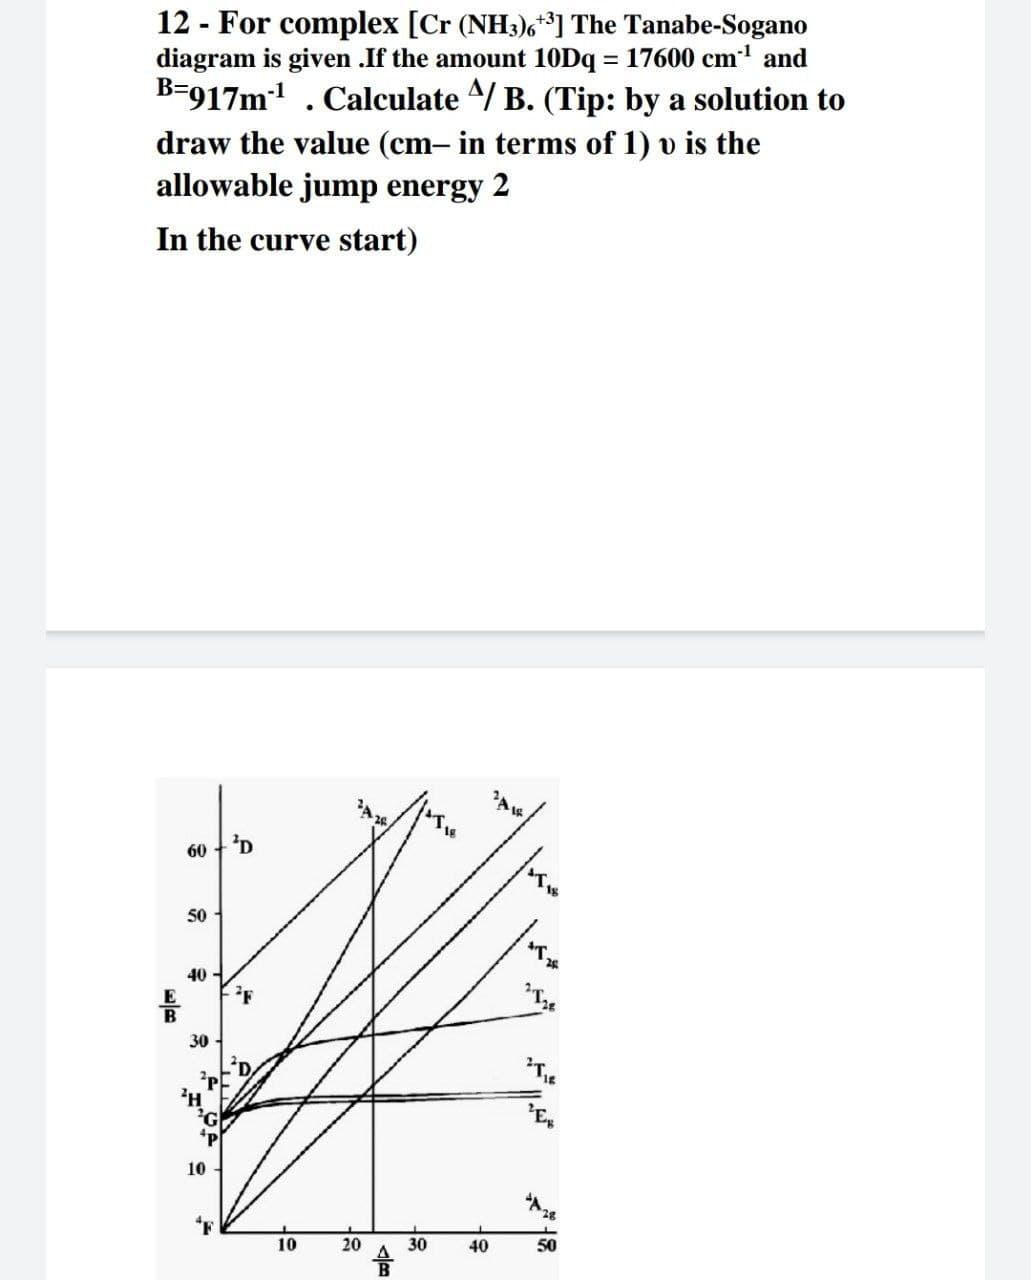 12 - For complex [Cr (NH3)6**] The Tanabe-Sogano
diagram is given .If the amount 10Dq = 17600 cm' and
B-917m . Calculate 4/ B. (Tip: by a solution to
draw the value (cm- in terms of 1) v is the
allowable jump energy 2
In the curve start)
60
50
40 -
30
10
28
10
20
30
40
50
